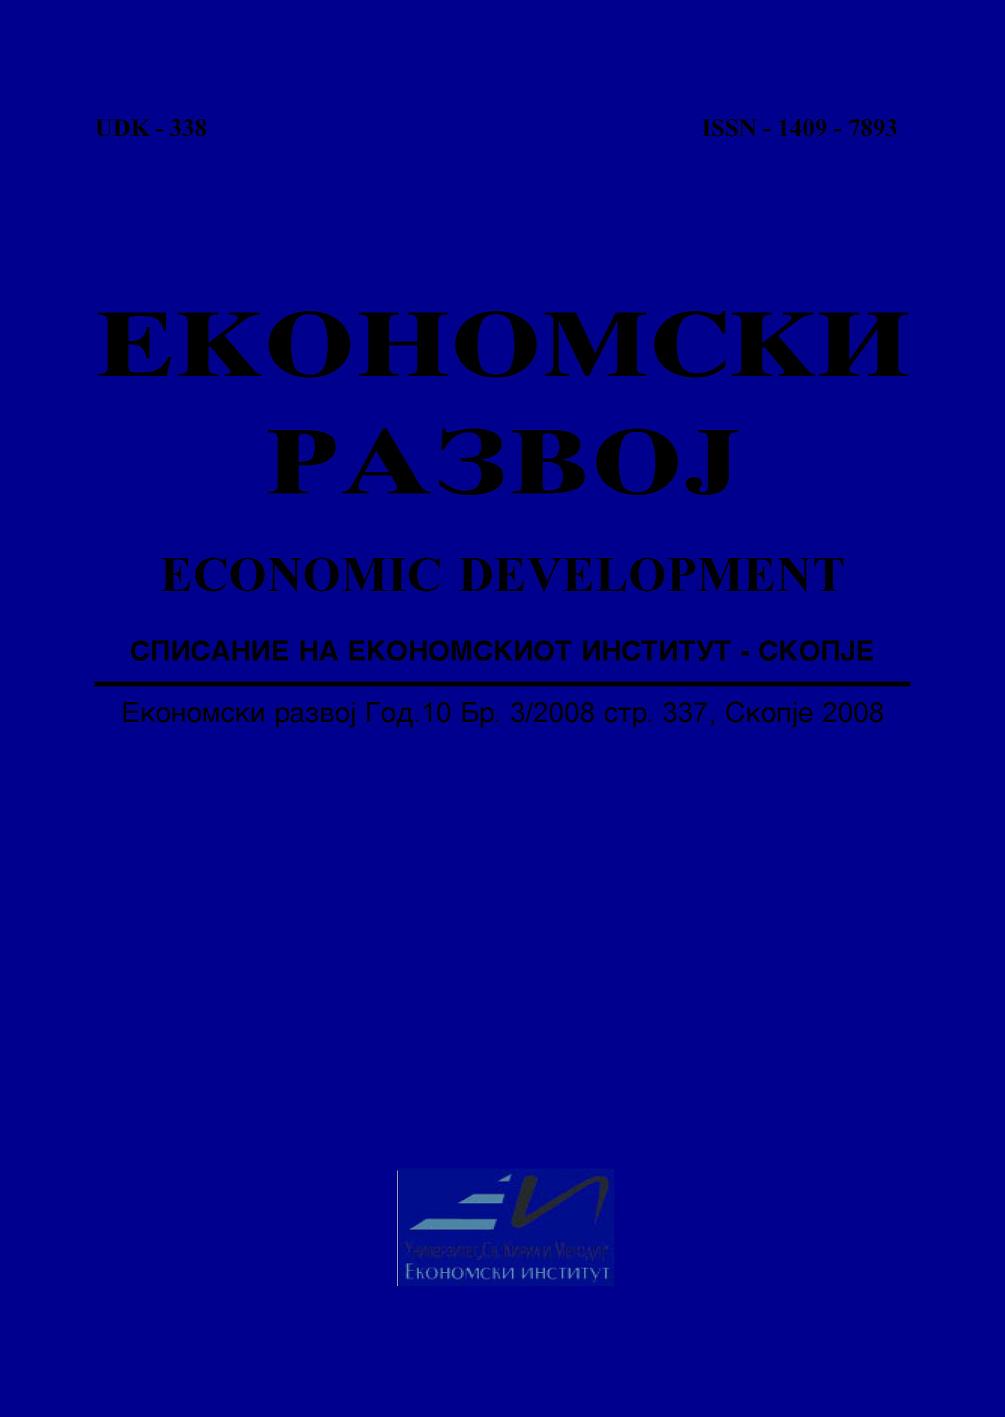 FREE TRADE AREA OF THE SOUTH EASTERN EUROPEAN REGION Cover Image